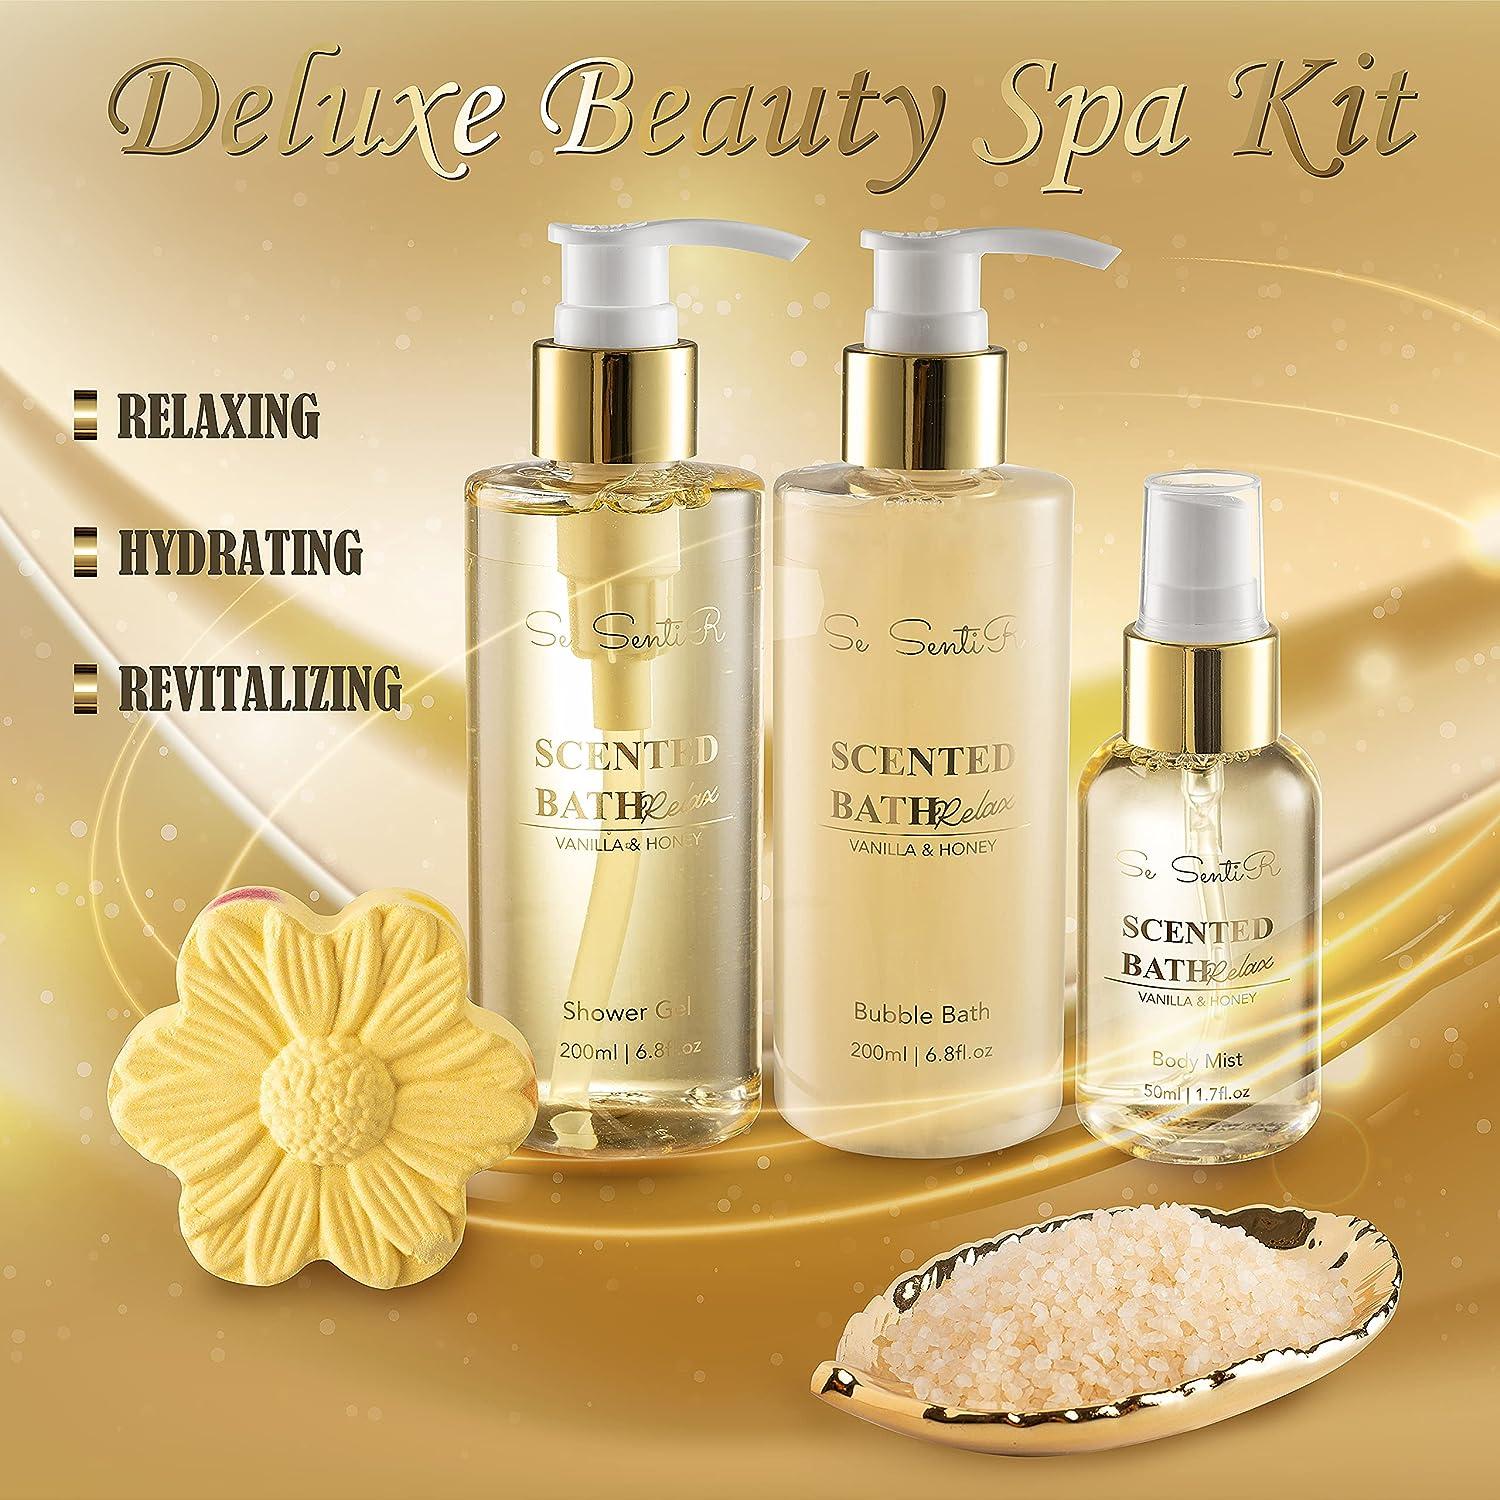 Ultimate Relaxation Vanilla Spa Gift Set